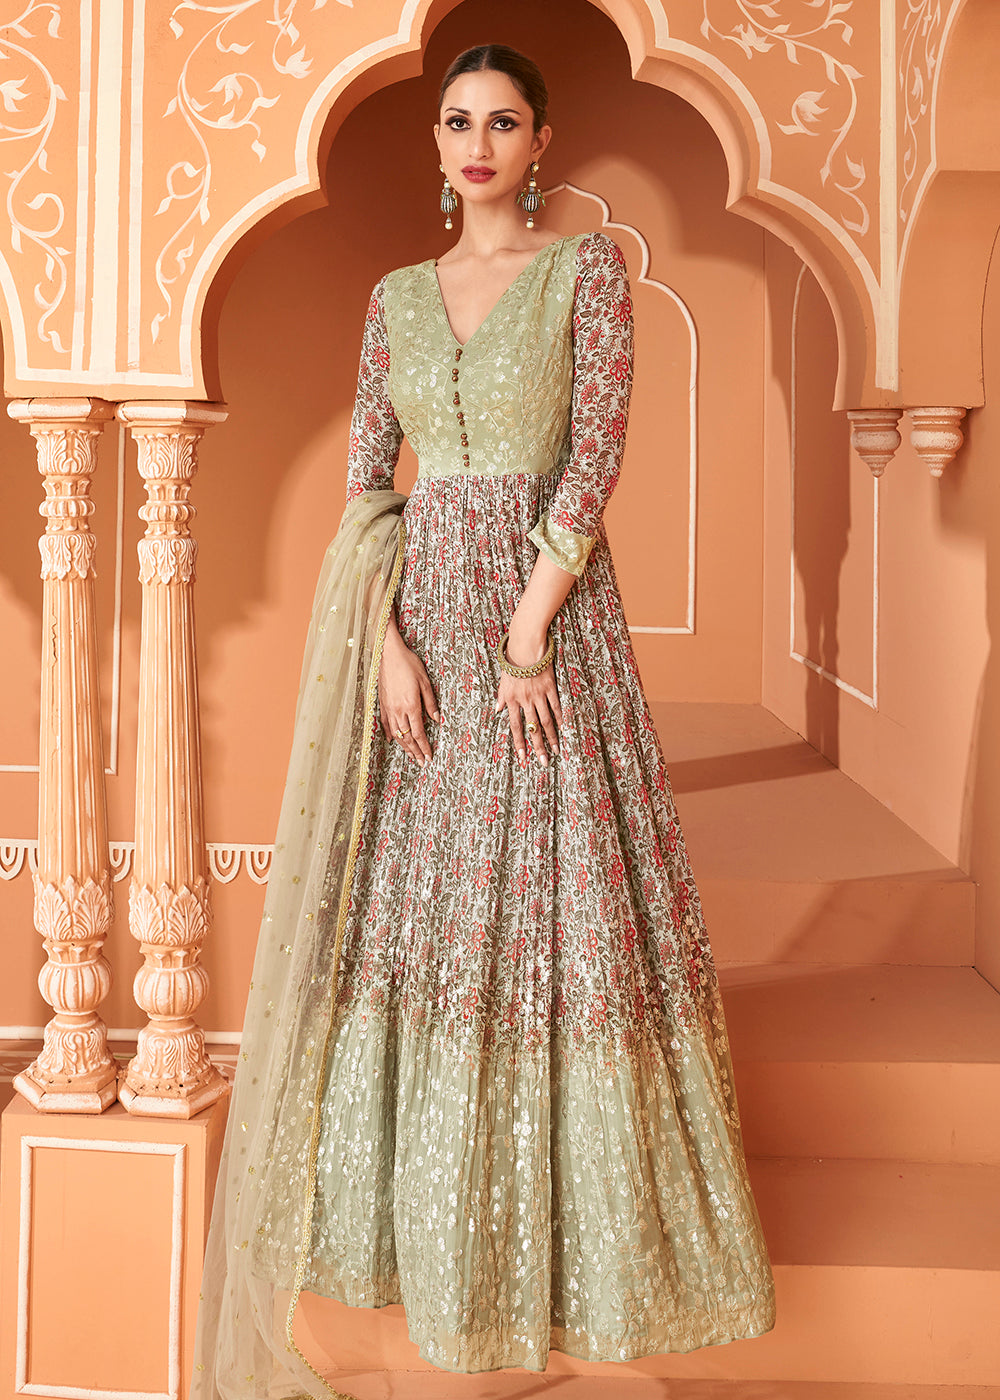 Buy Now Wedding Wear Floral Embroidered Light Green Anarkali Suit Online in USA, UK, Australia, New Zealand, Canada & Worldwide at Empress Clothing.